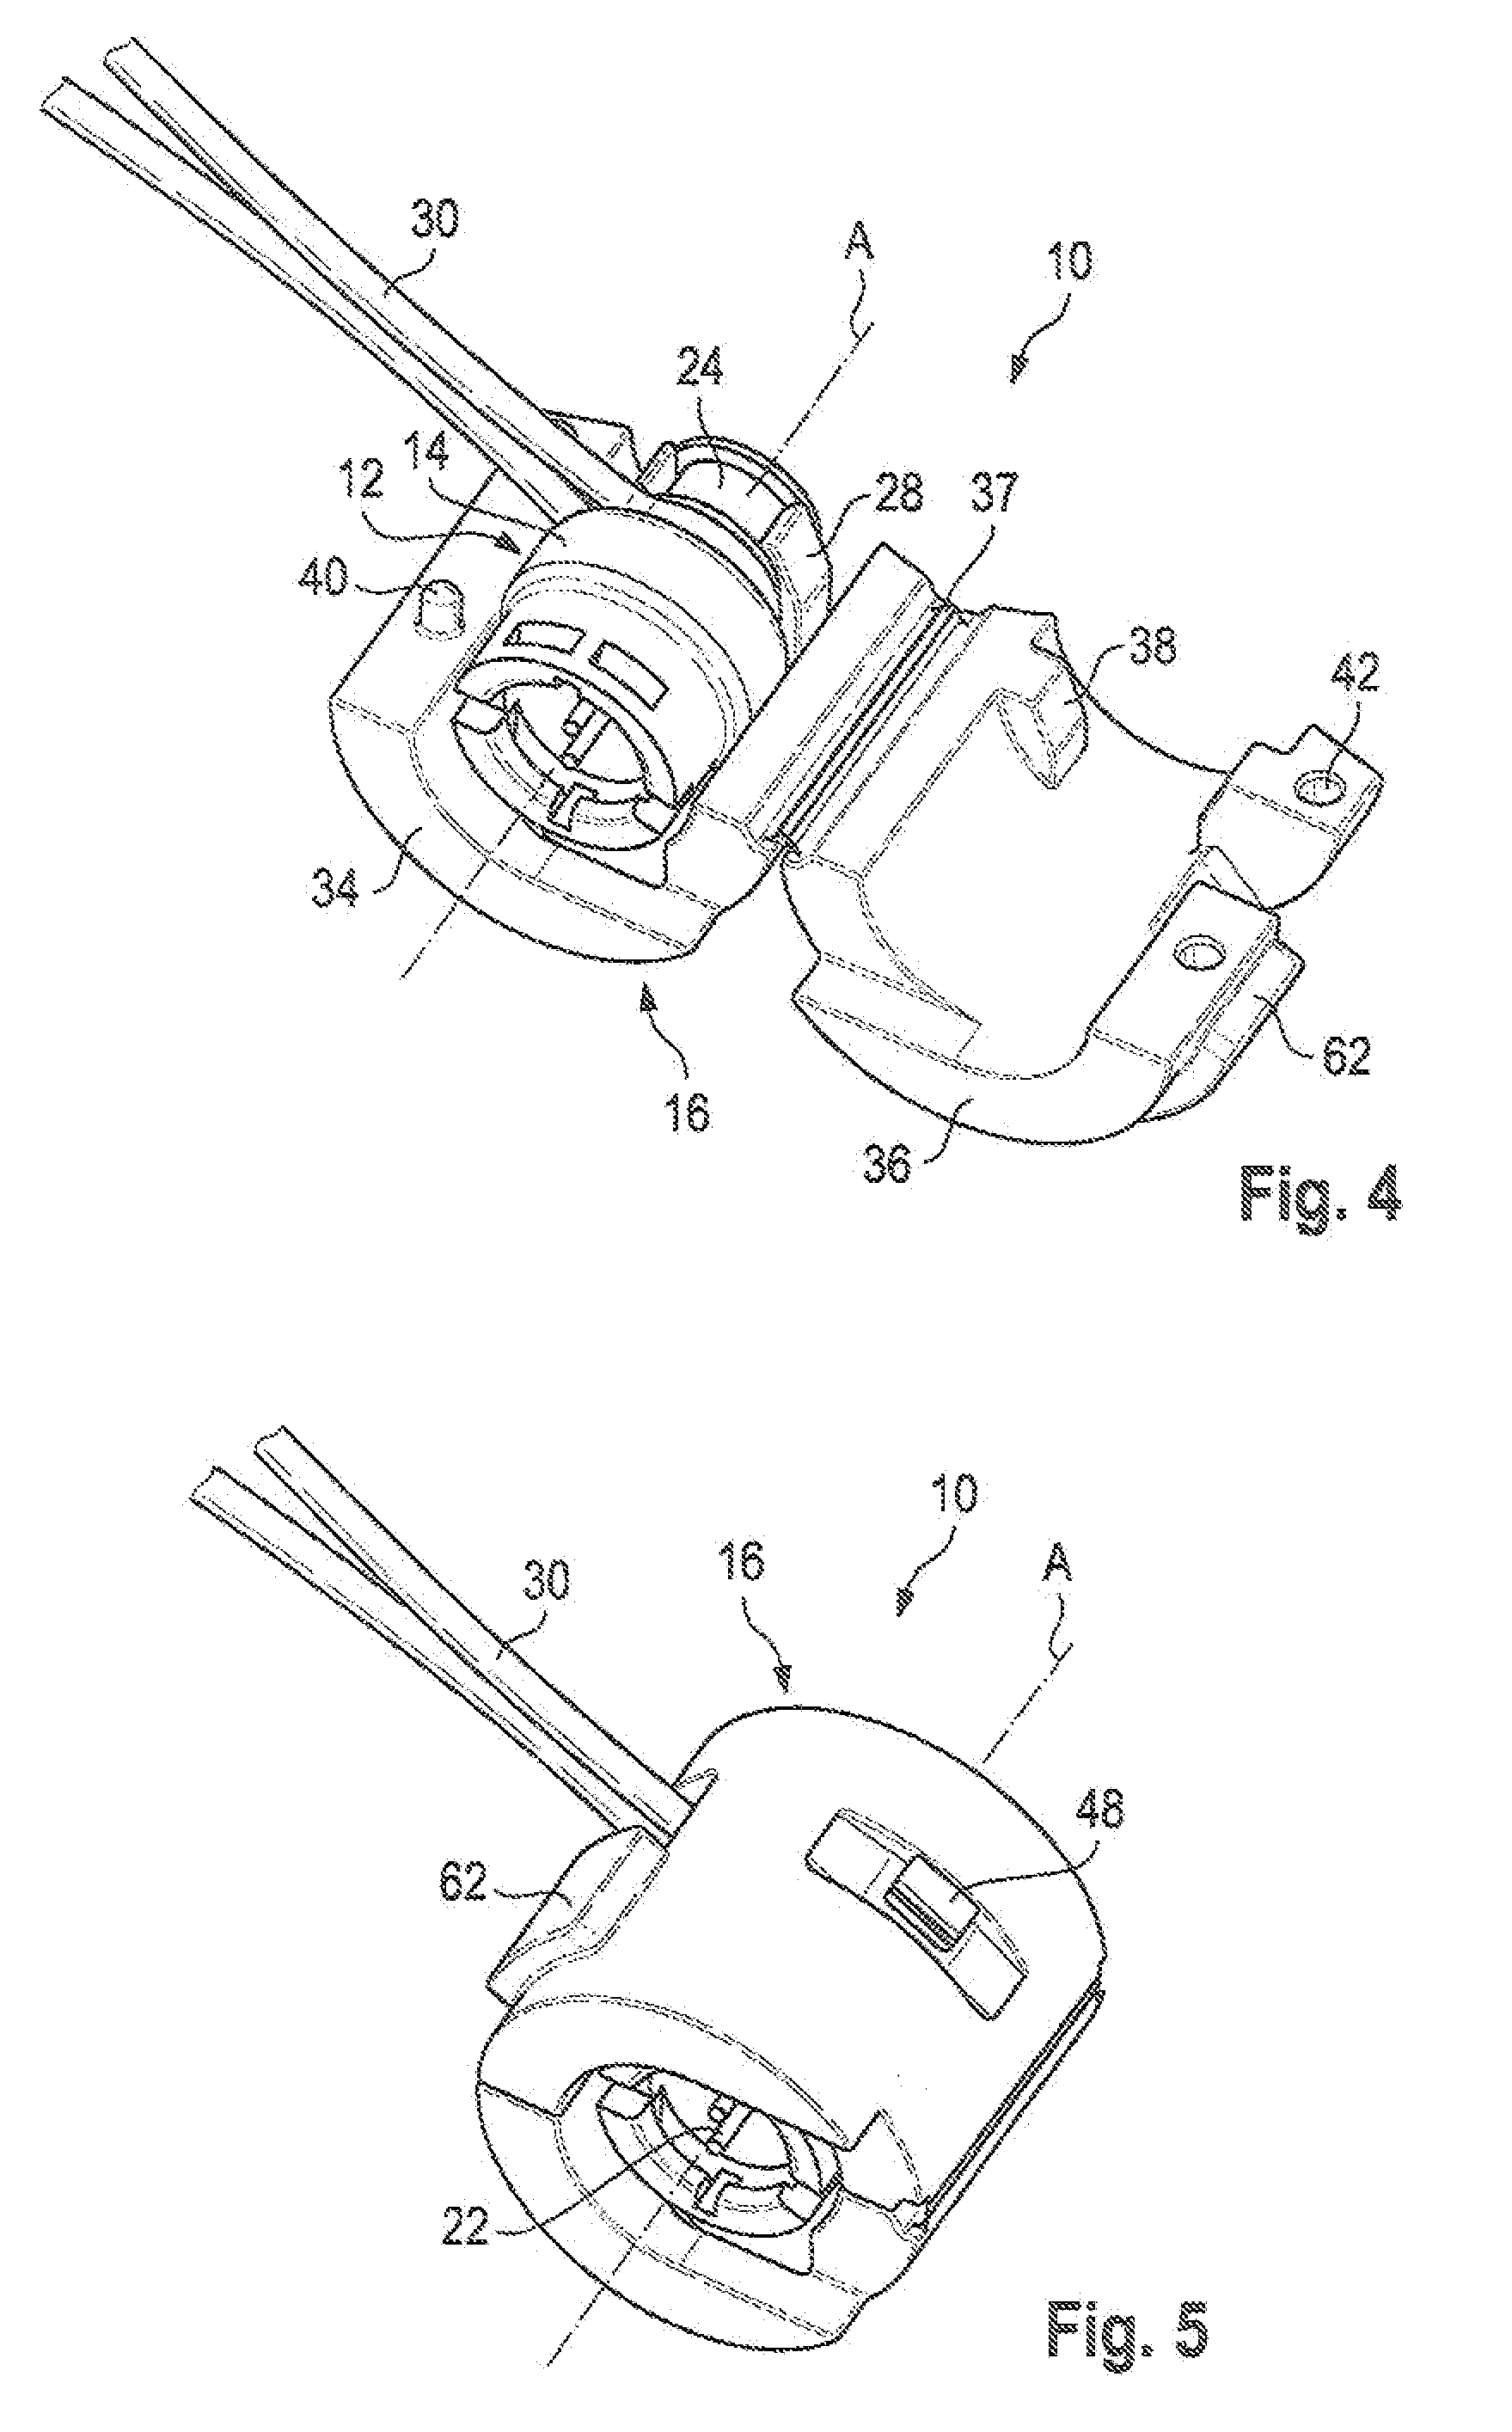 Actuator subassembly